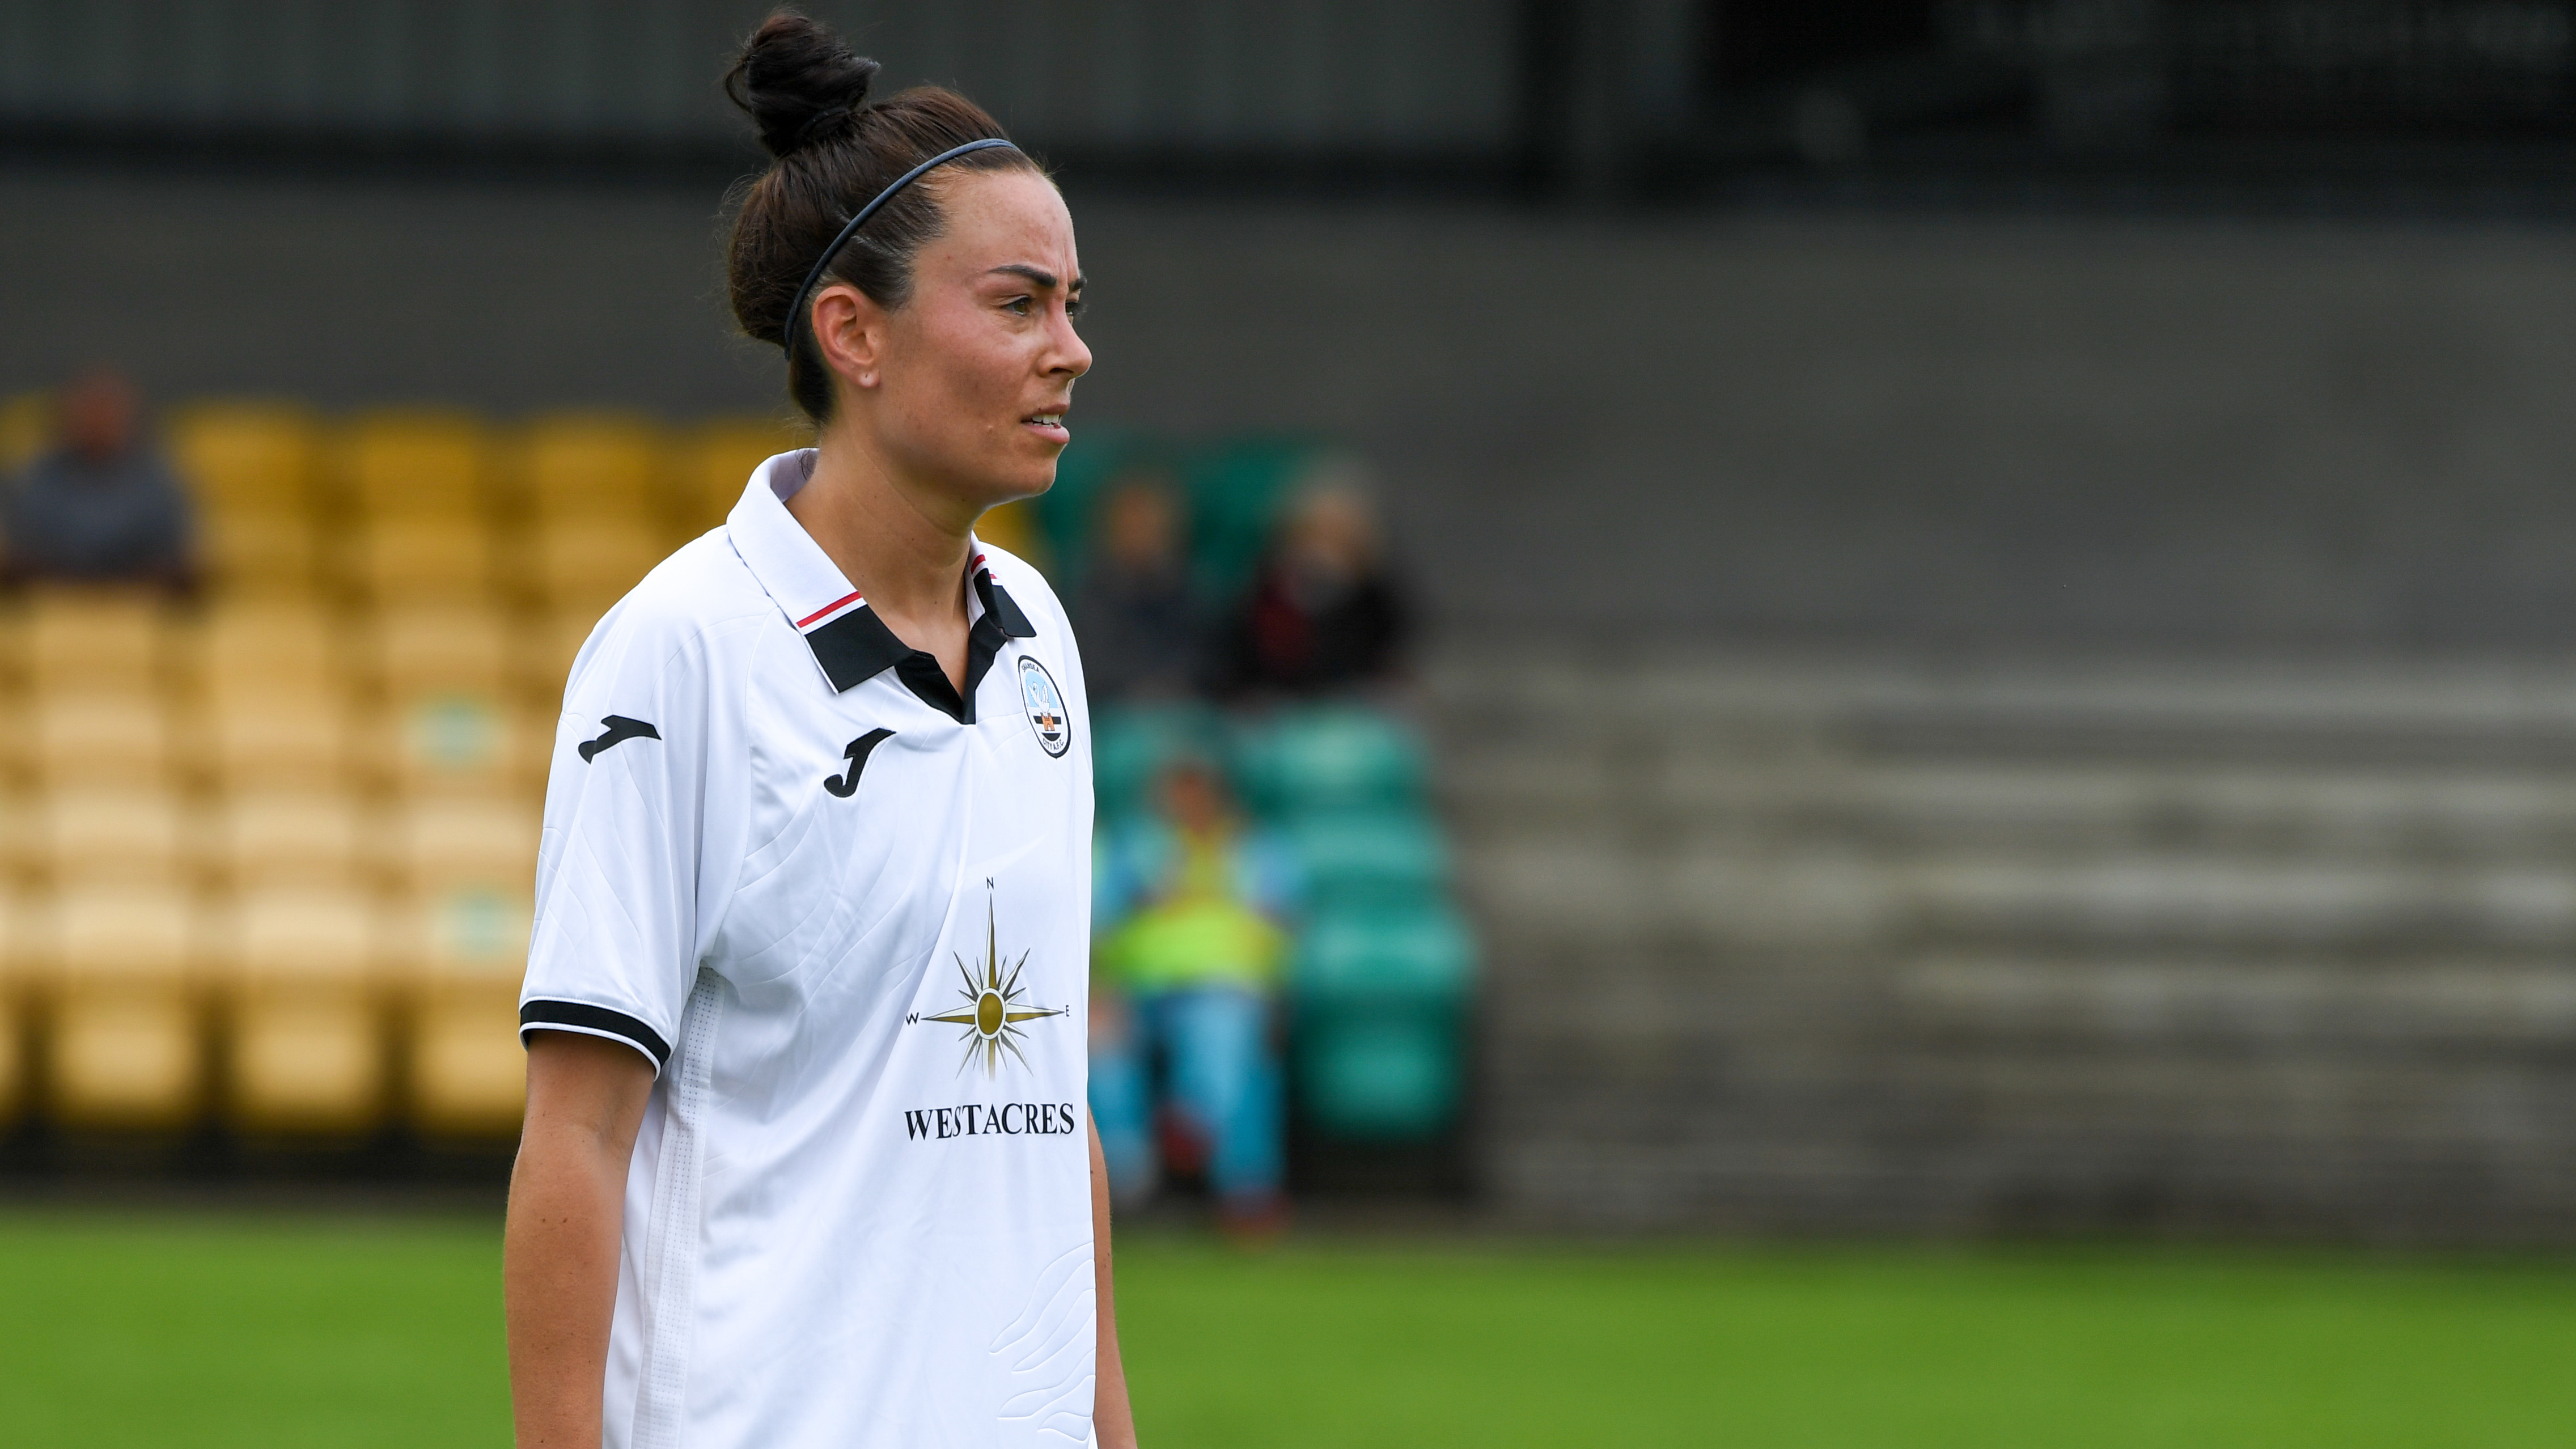 Close up of Alicia Powe playing for Swansea City Ladies